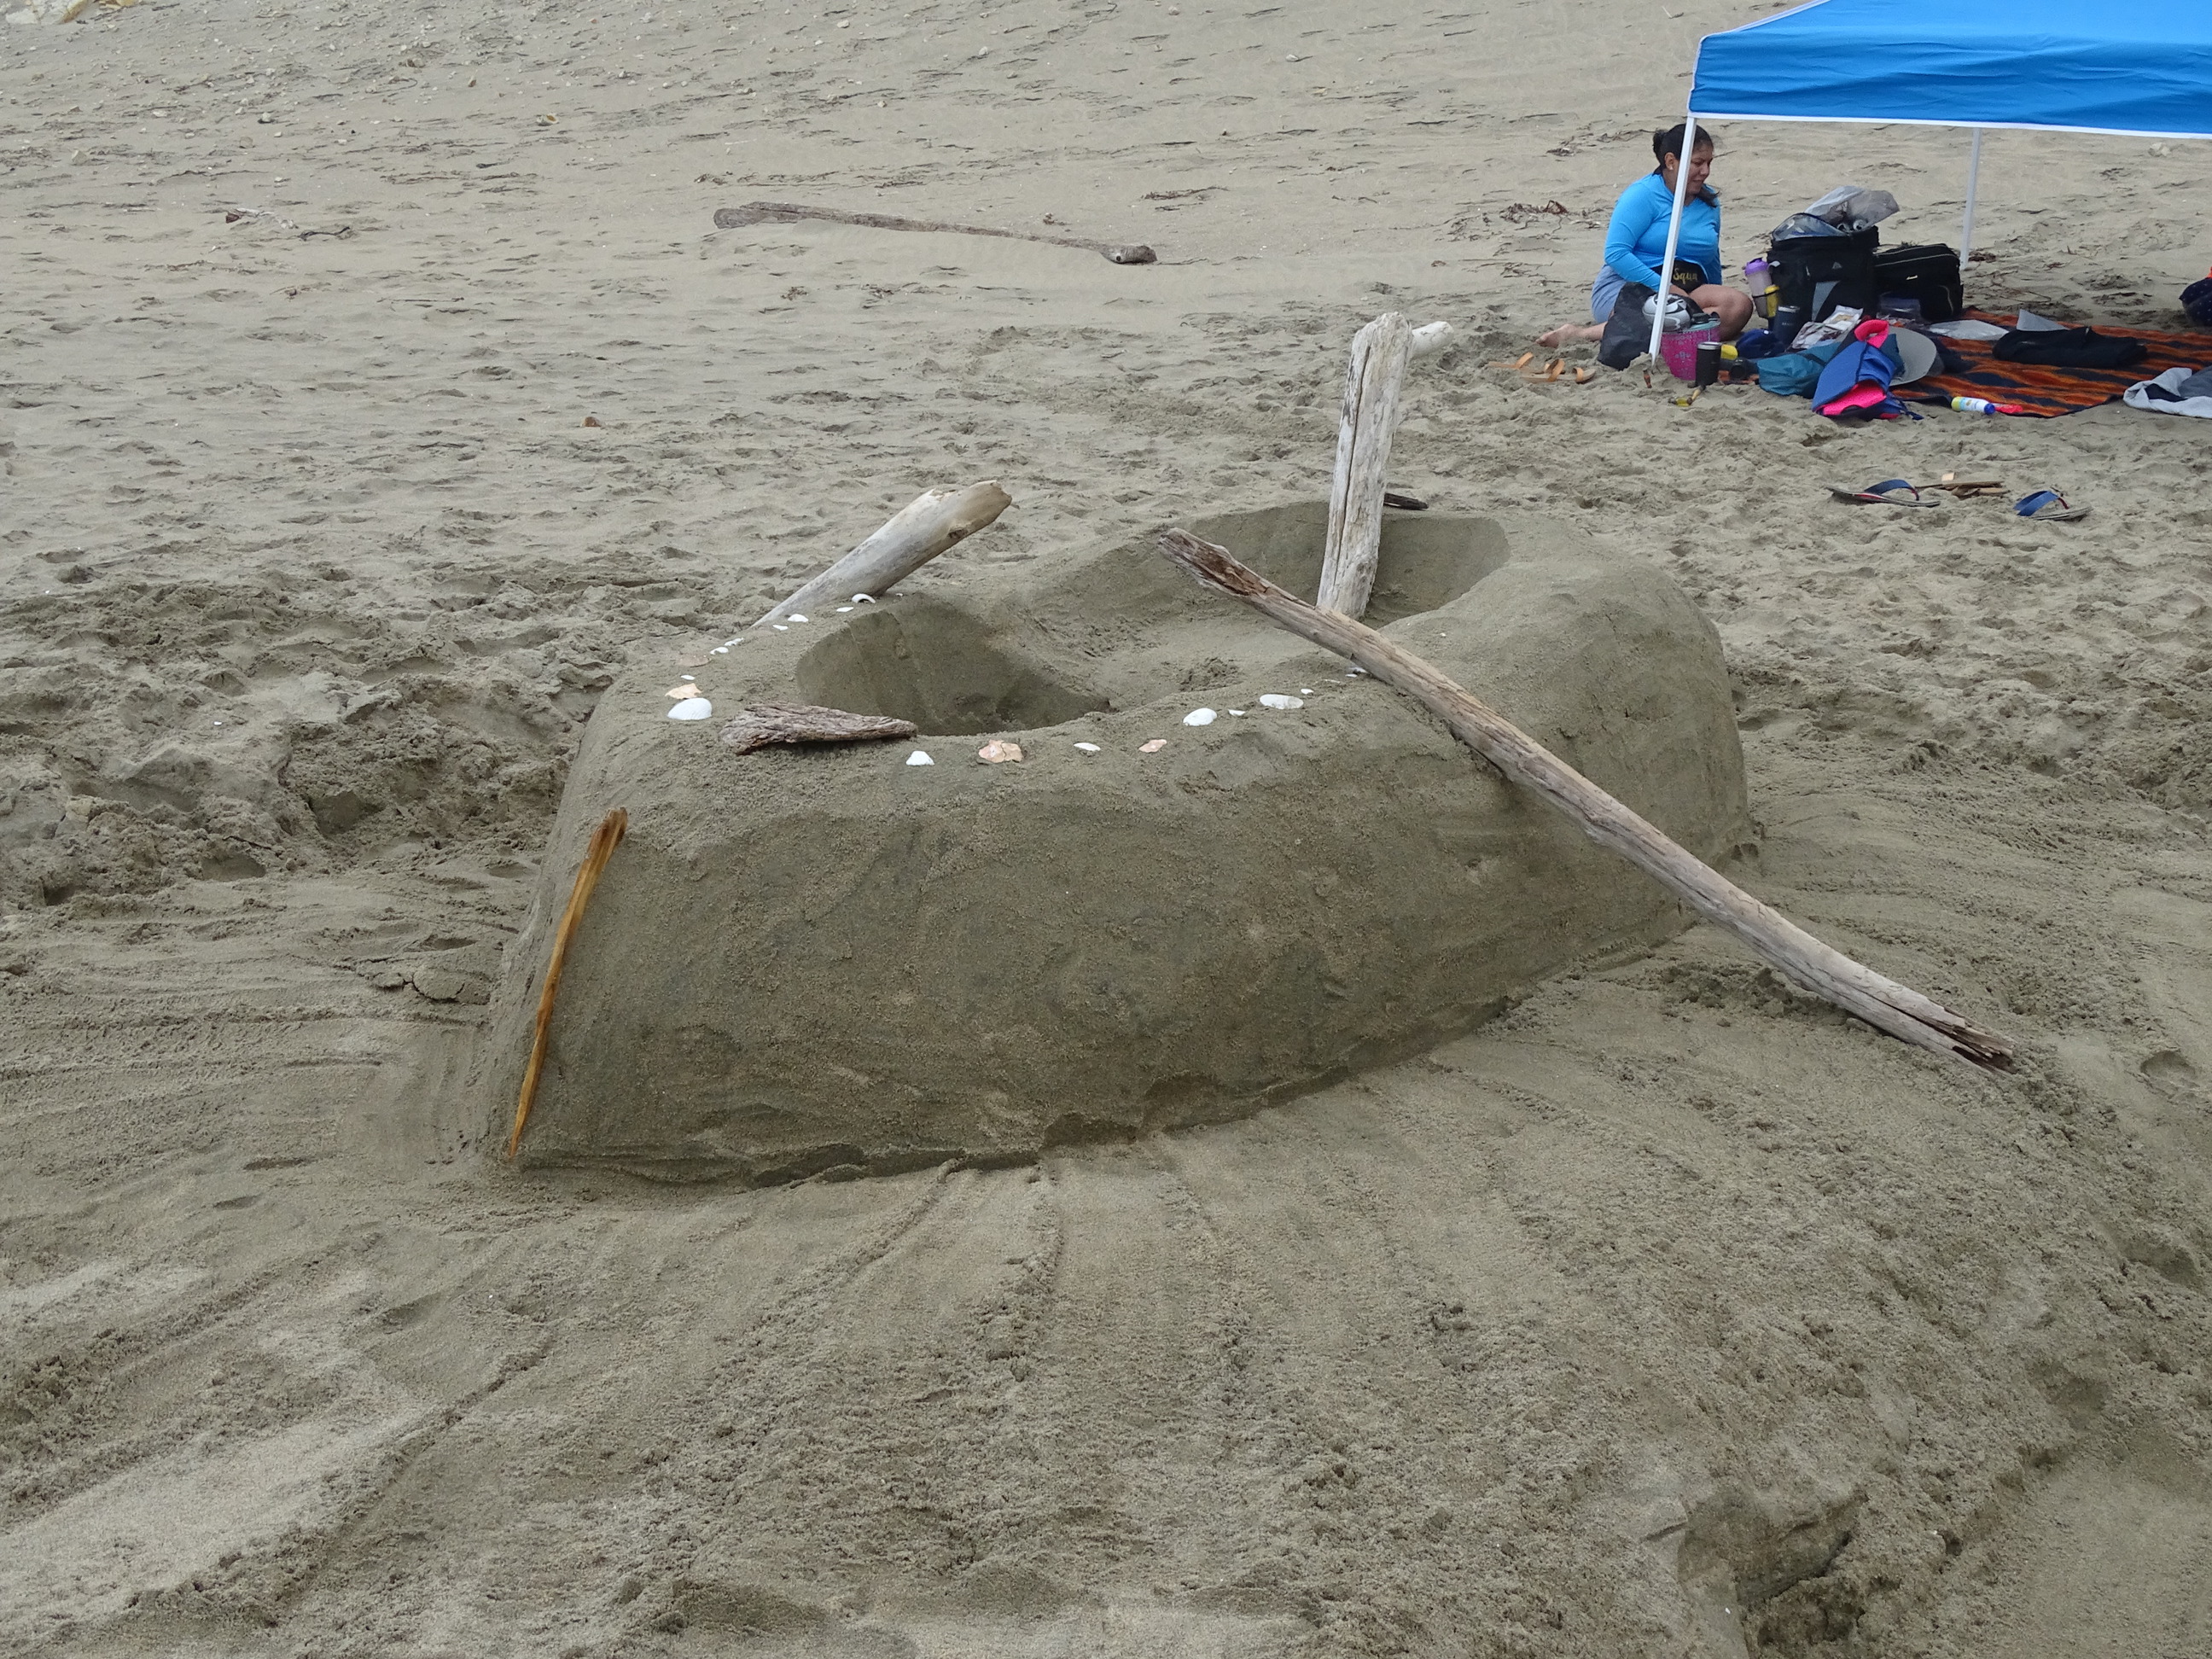 A sand sculpture of a boat.